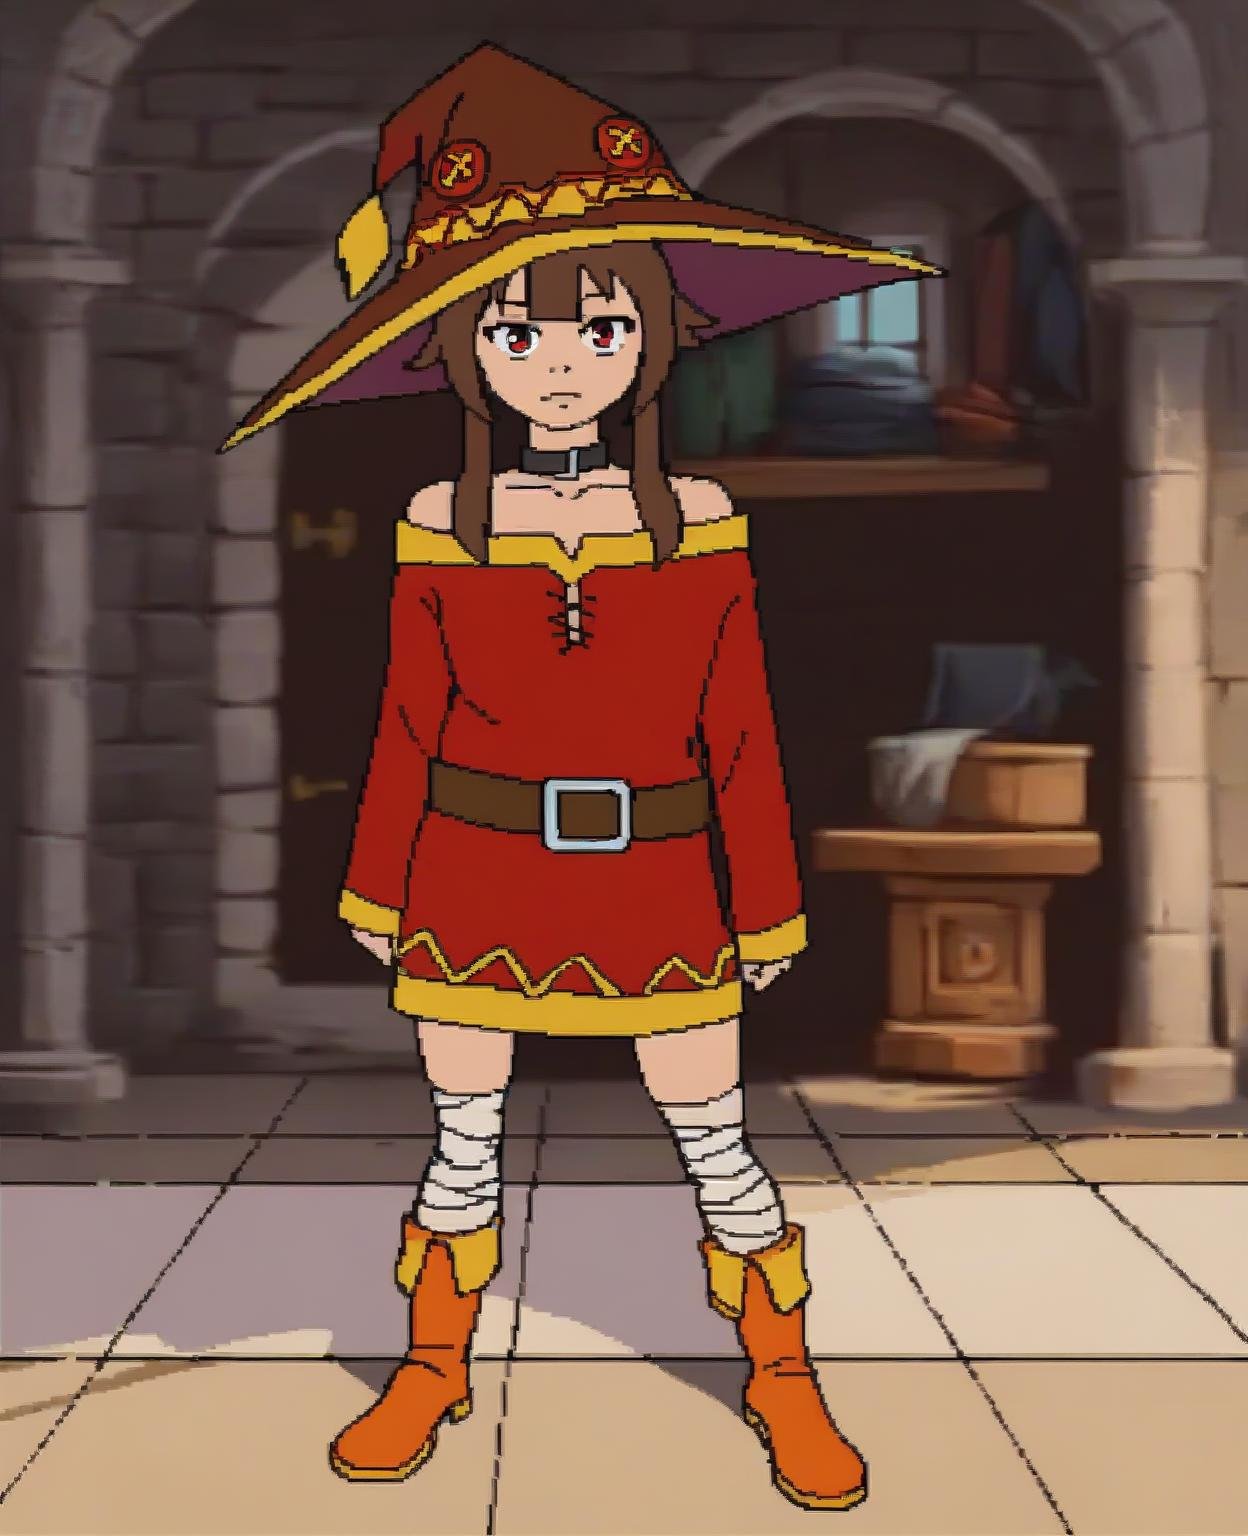 score_9, score_8_up, score_7_up, score_6_up, score_5_up, score_4_up, source_anime, indoors, 2D, flat shading, flat color, jaggy lines, megumin \(konosuba\), human, mammal, bandage, belt, boots, brown hair, clothed, clothing, female, footwear, hair, hat, headgear, headwear, jewelry, looking at viewer, necklace, red eyes, indoors, window, solo, standing, wizard hat, upper body, close-up <lora:cdi_pdxl_:1> 